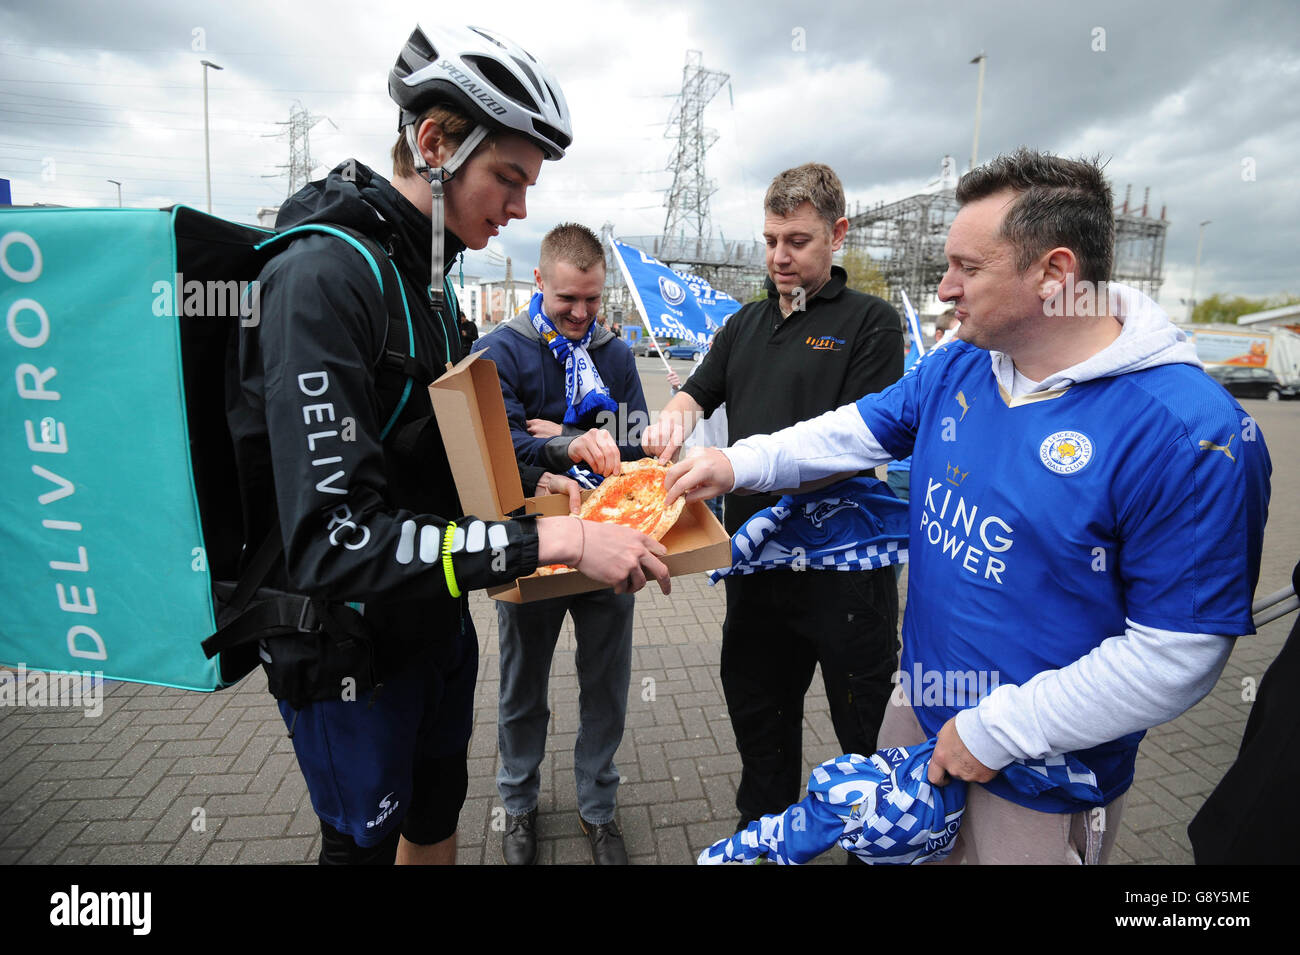 A Deliveroo rider delivers freebies from Peter Pizzeria to Leicester City FC fans outside the King Power Stadium in Leicester, ahead of the team lifting the Barclays Premier League trophy this weekend. Stock Photo